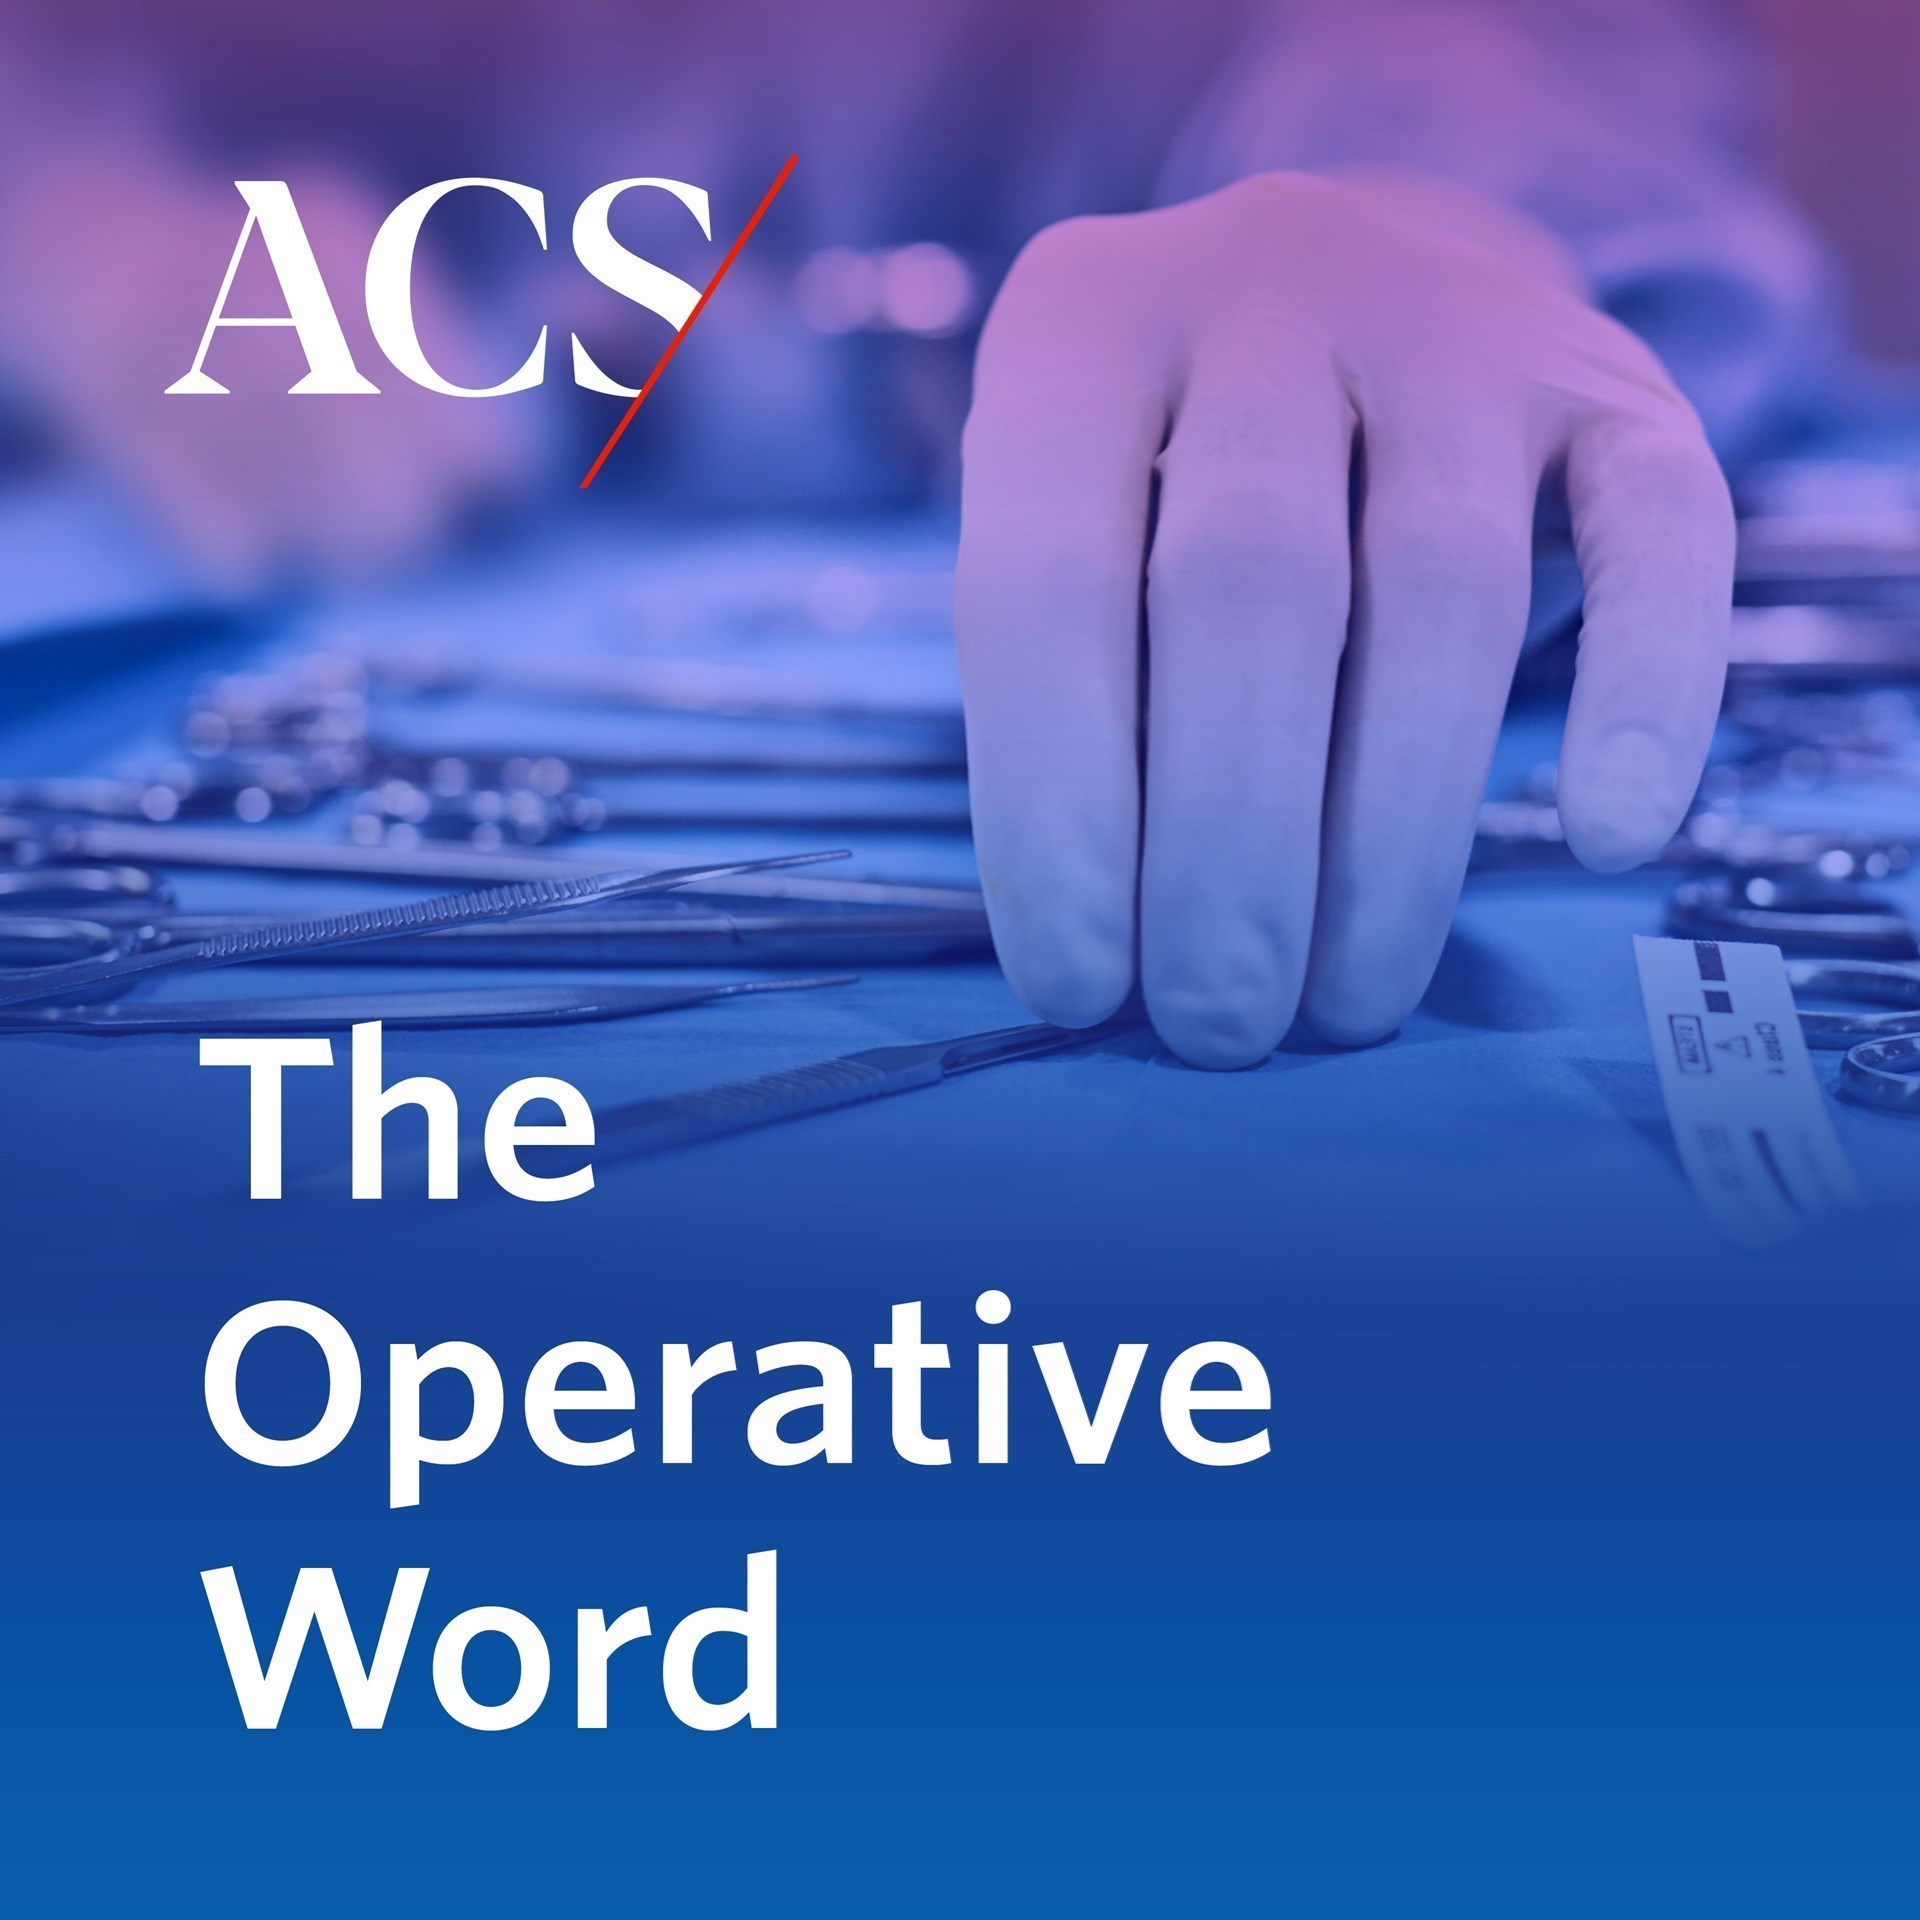 Listen to the New JACS Podcast Series, The Operative Word